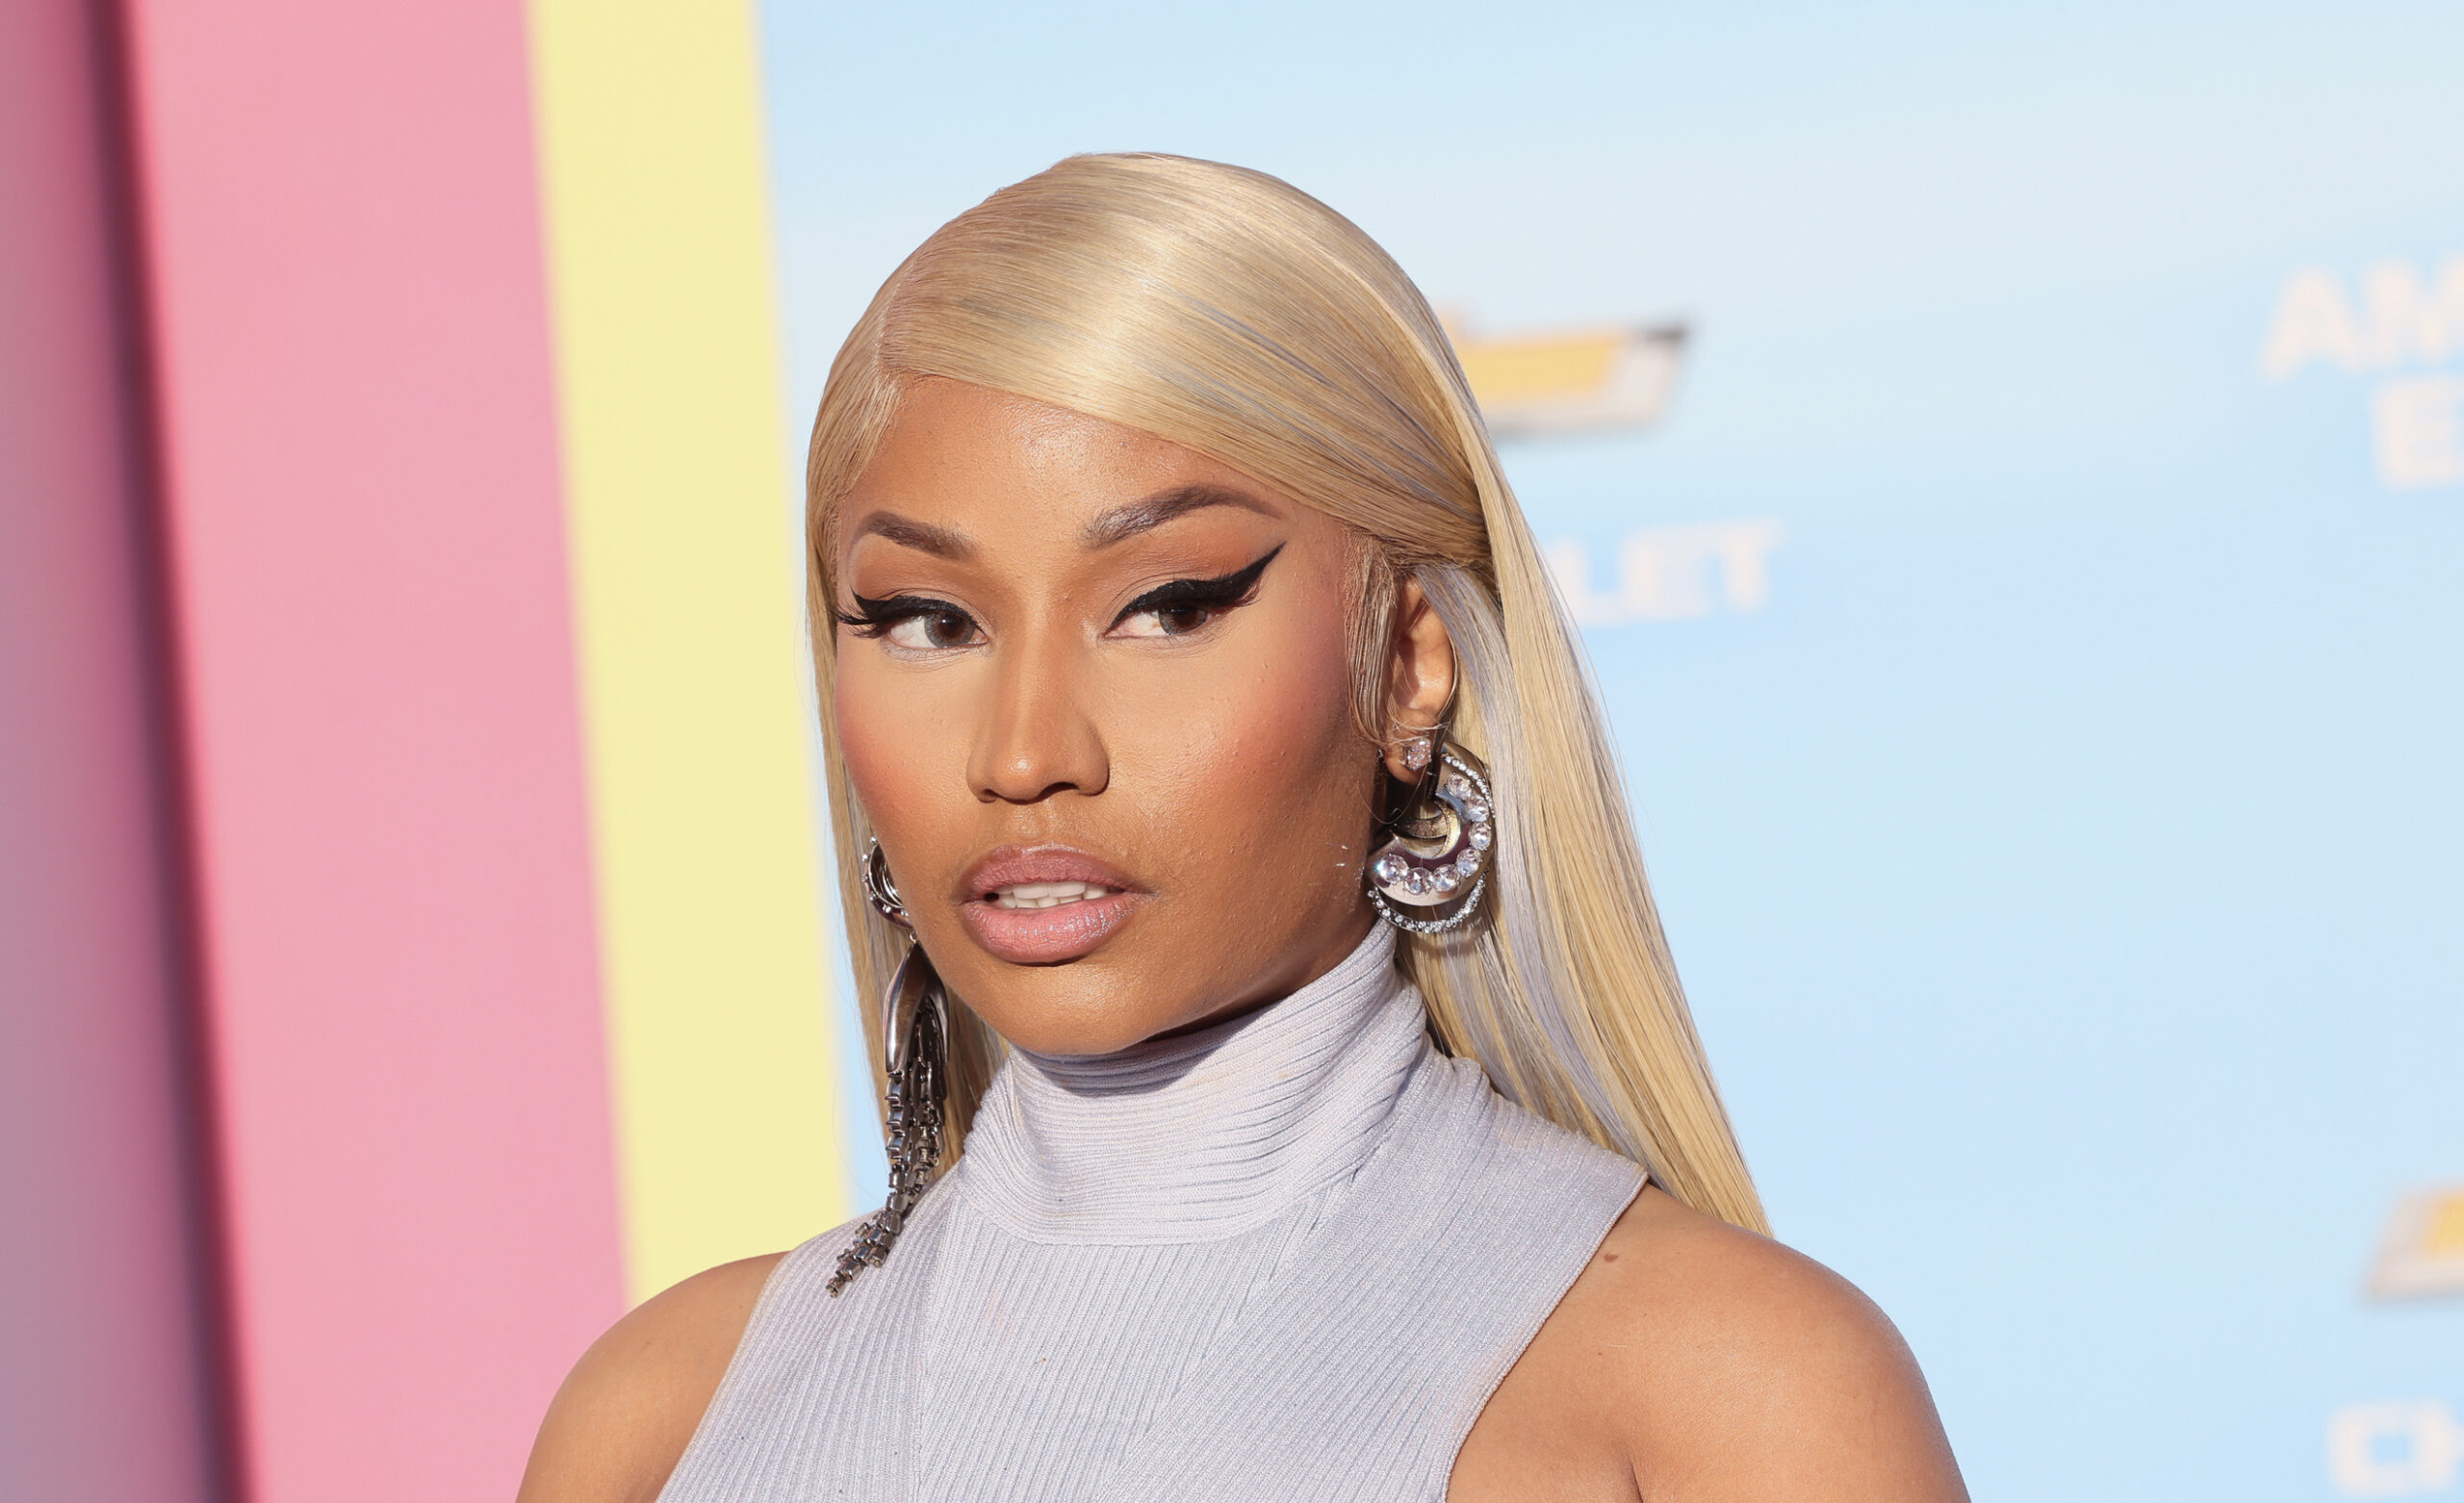 Nicki Minaj Says Sorry to Fans for Show Cancellation After Arrest